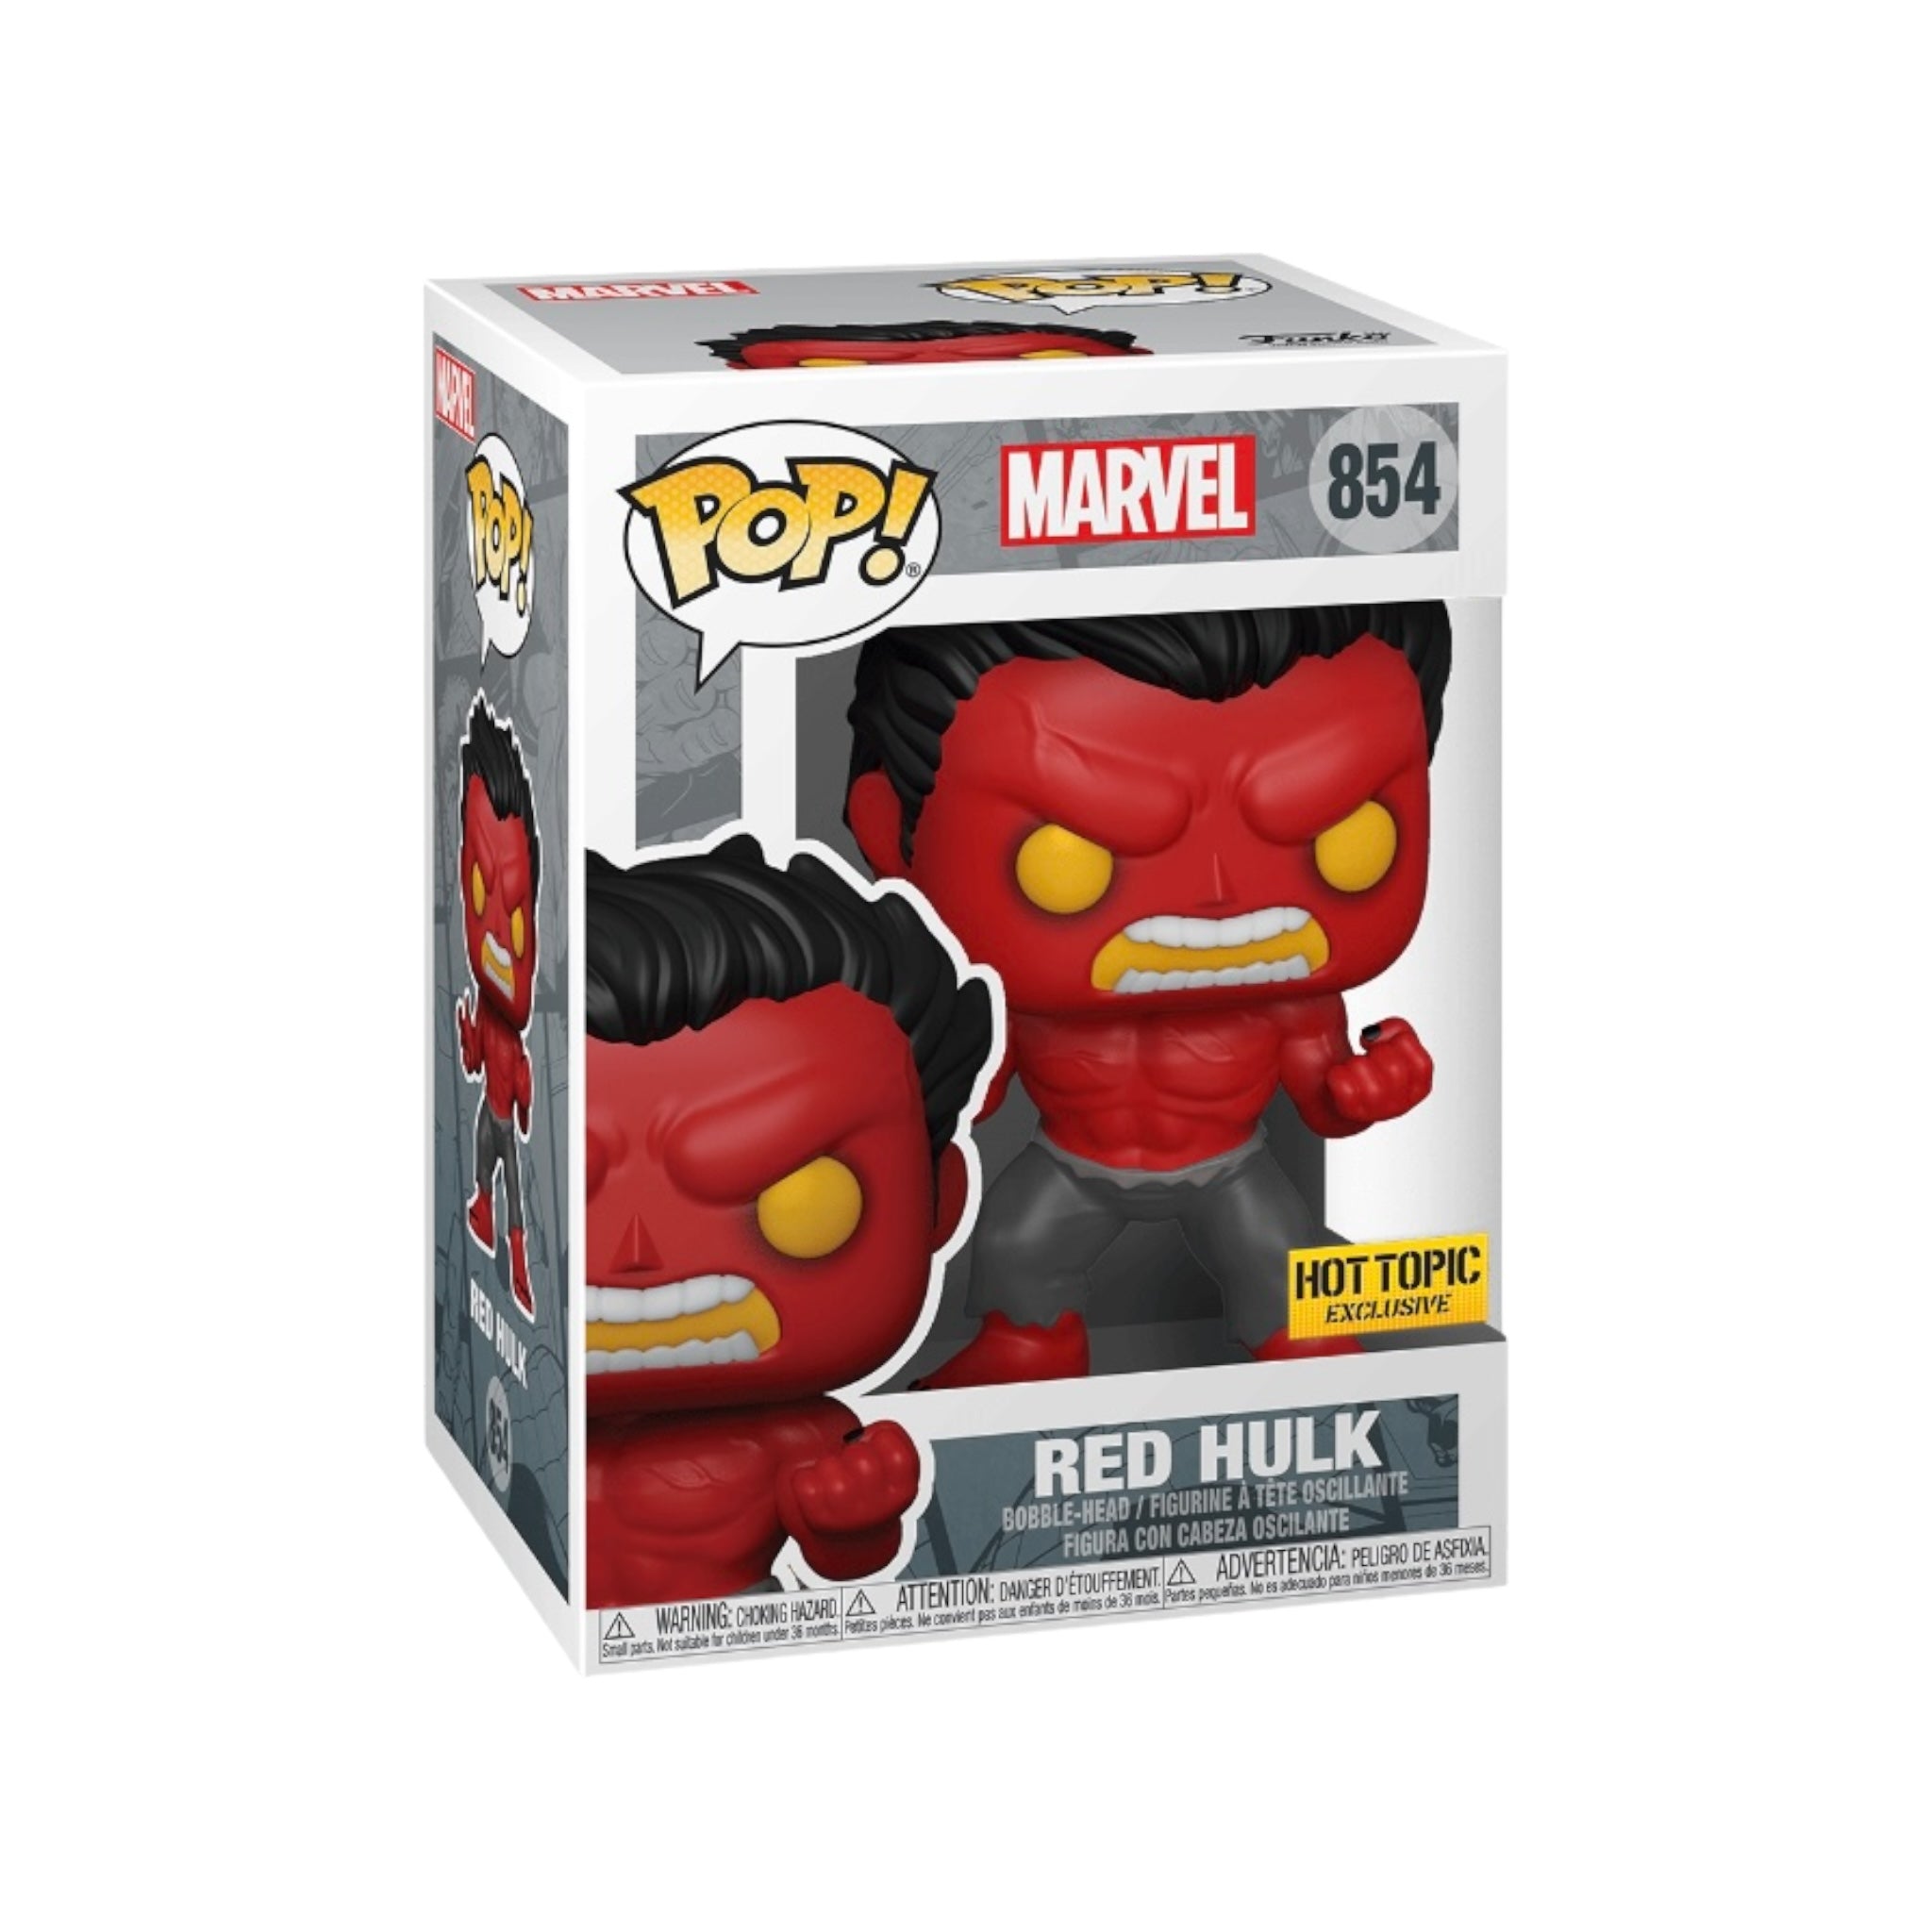 Red Hulk #854 Funko Pop! - Marvel - Hot Topic Exclusive